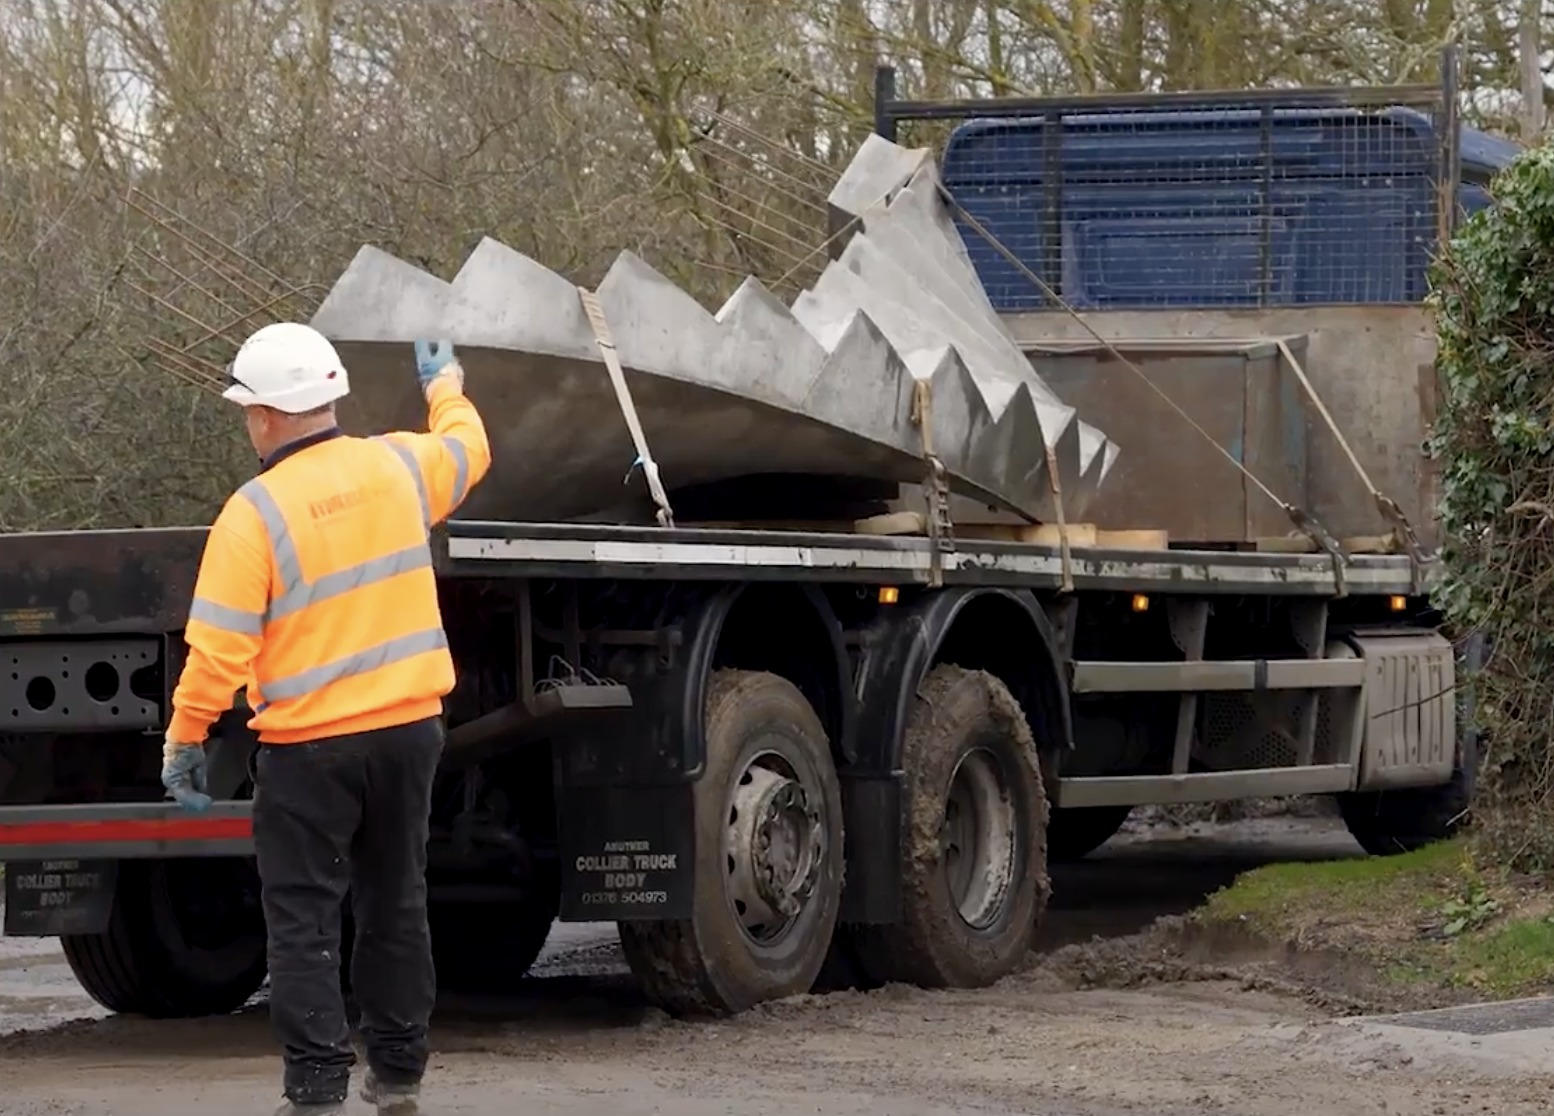 Precast concrete curved stair is delivered on back of rigid lorry